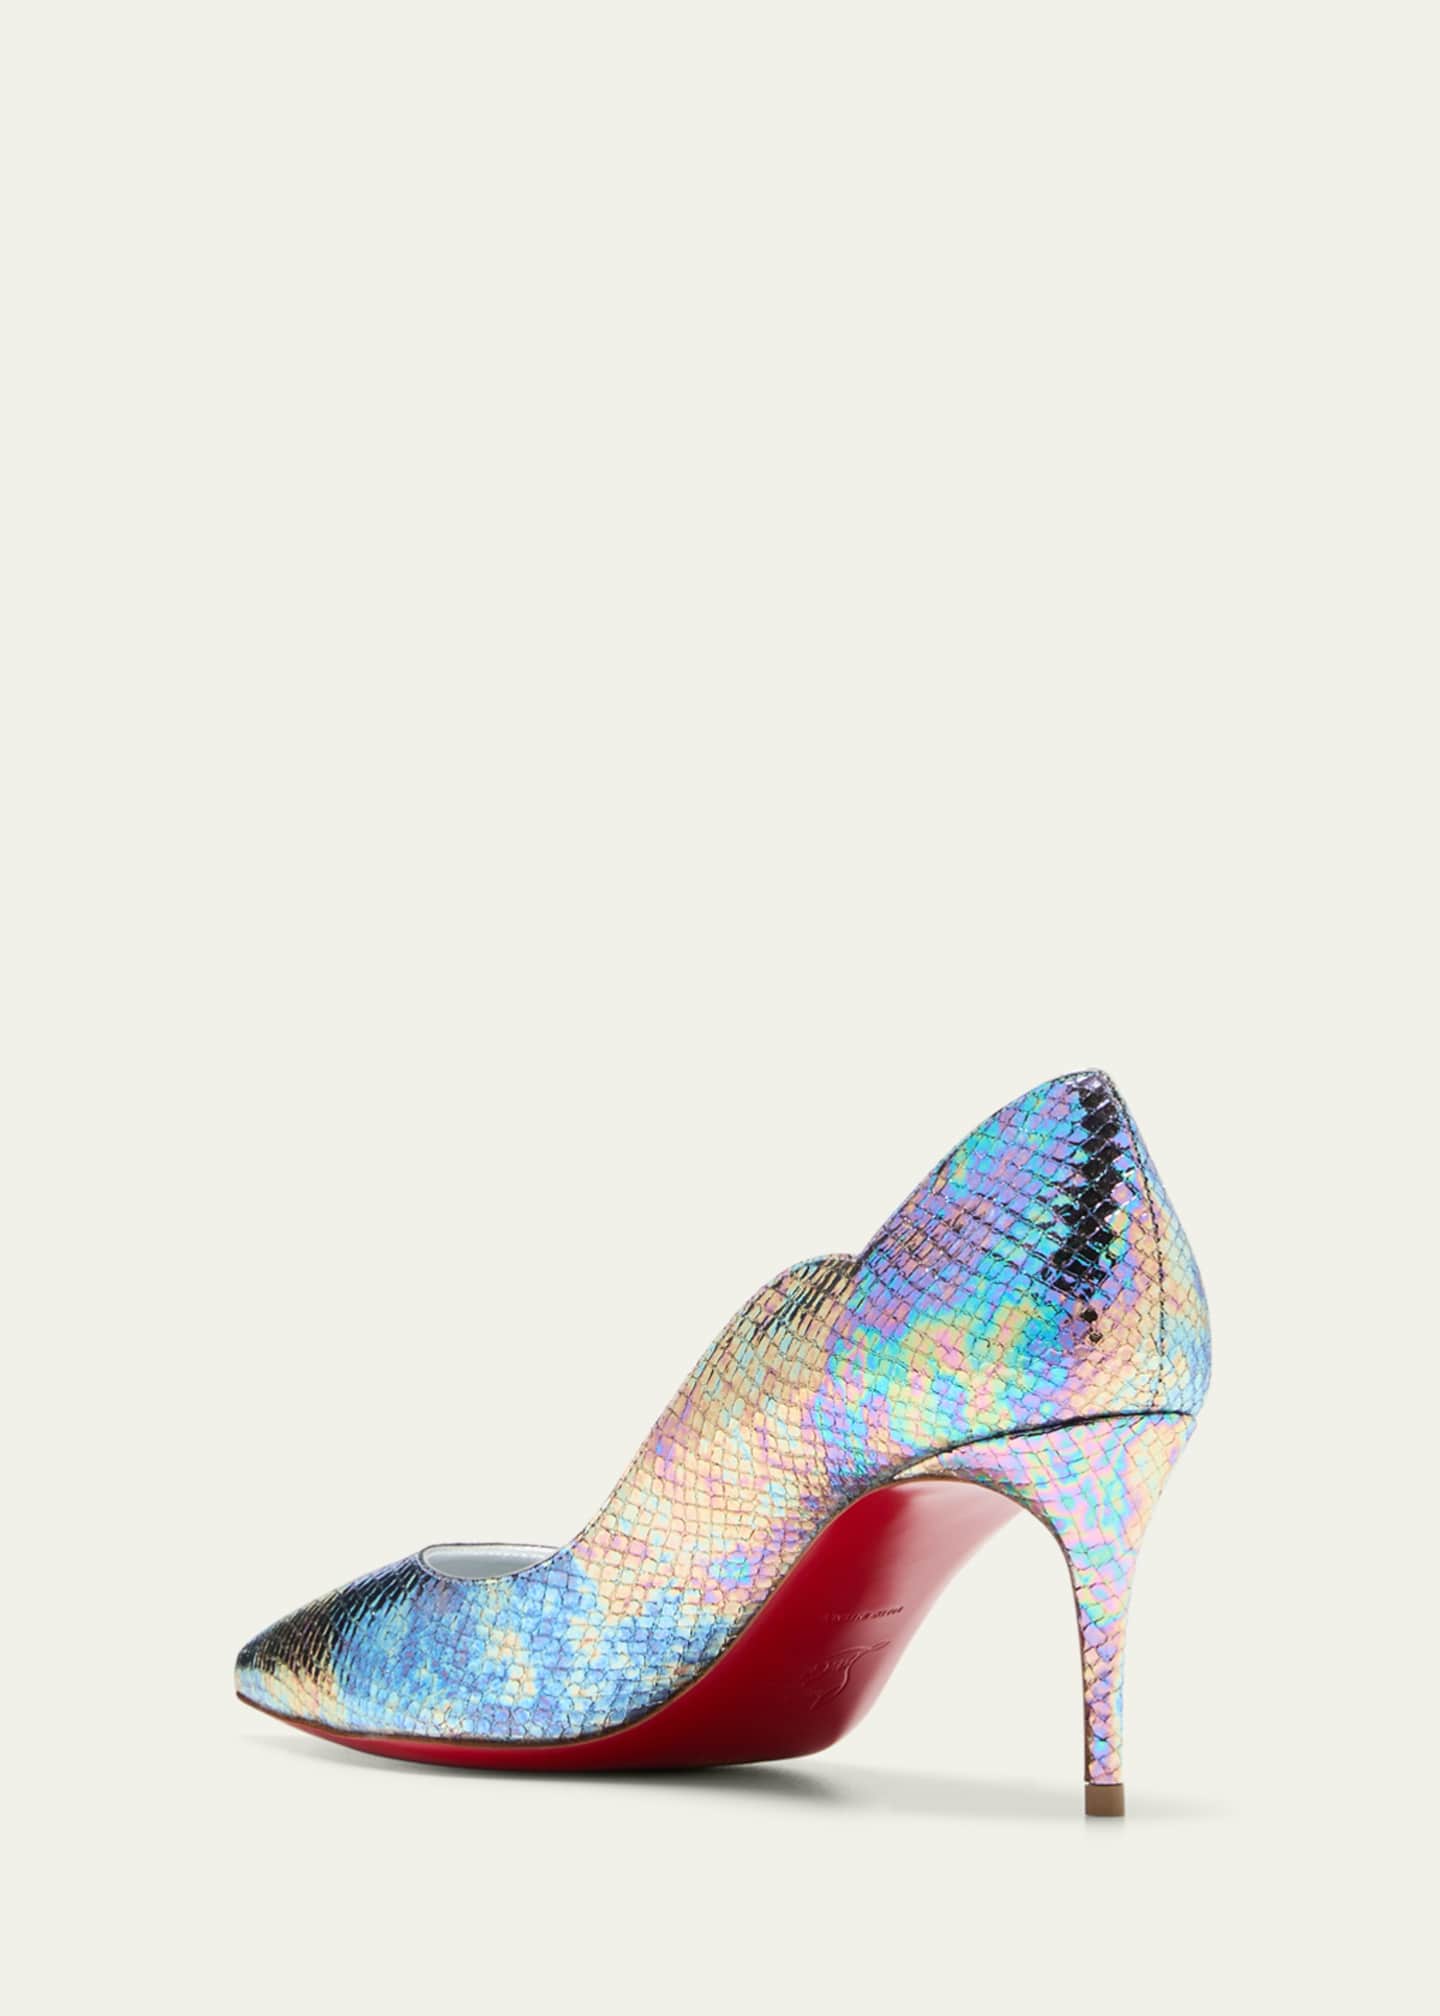 Christian Louboutin Hot Chick Iridescent Red Sole Slingback Pumps